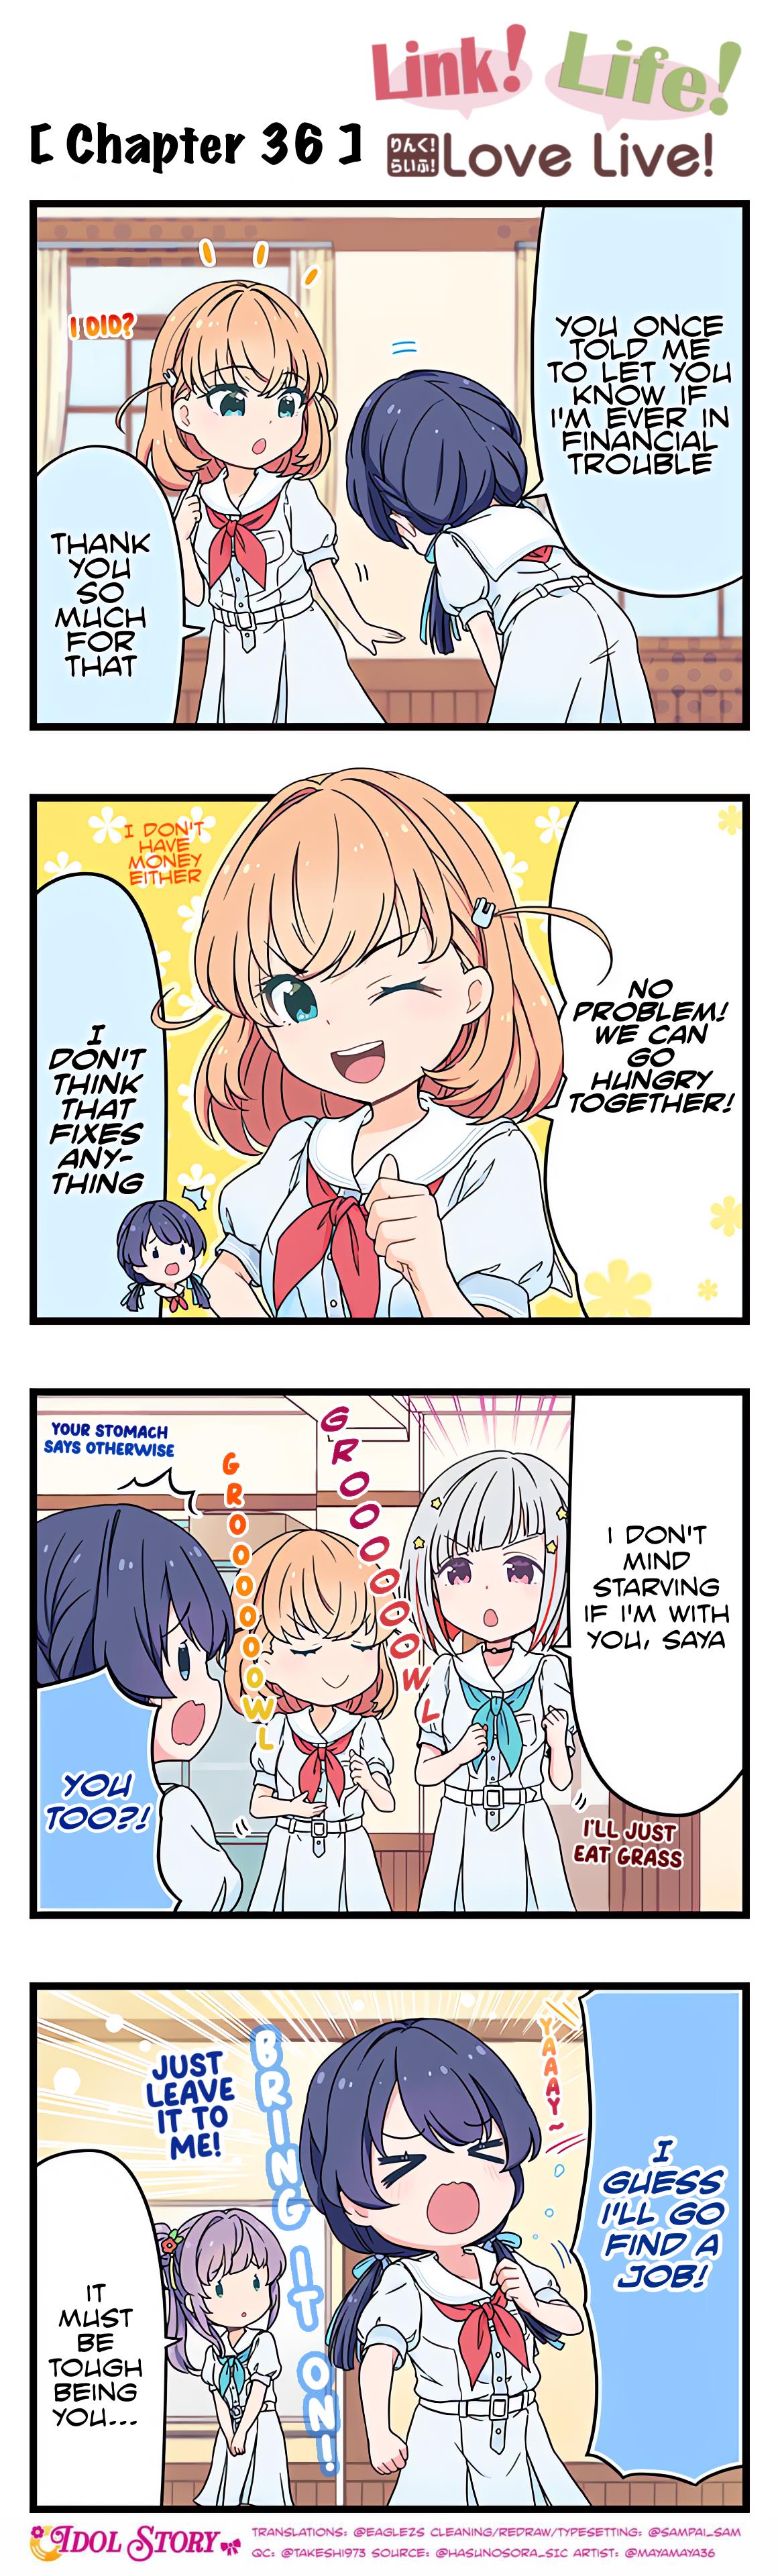 Link! Life! Love Live! - Page 1